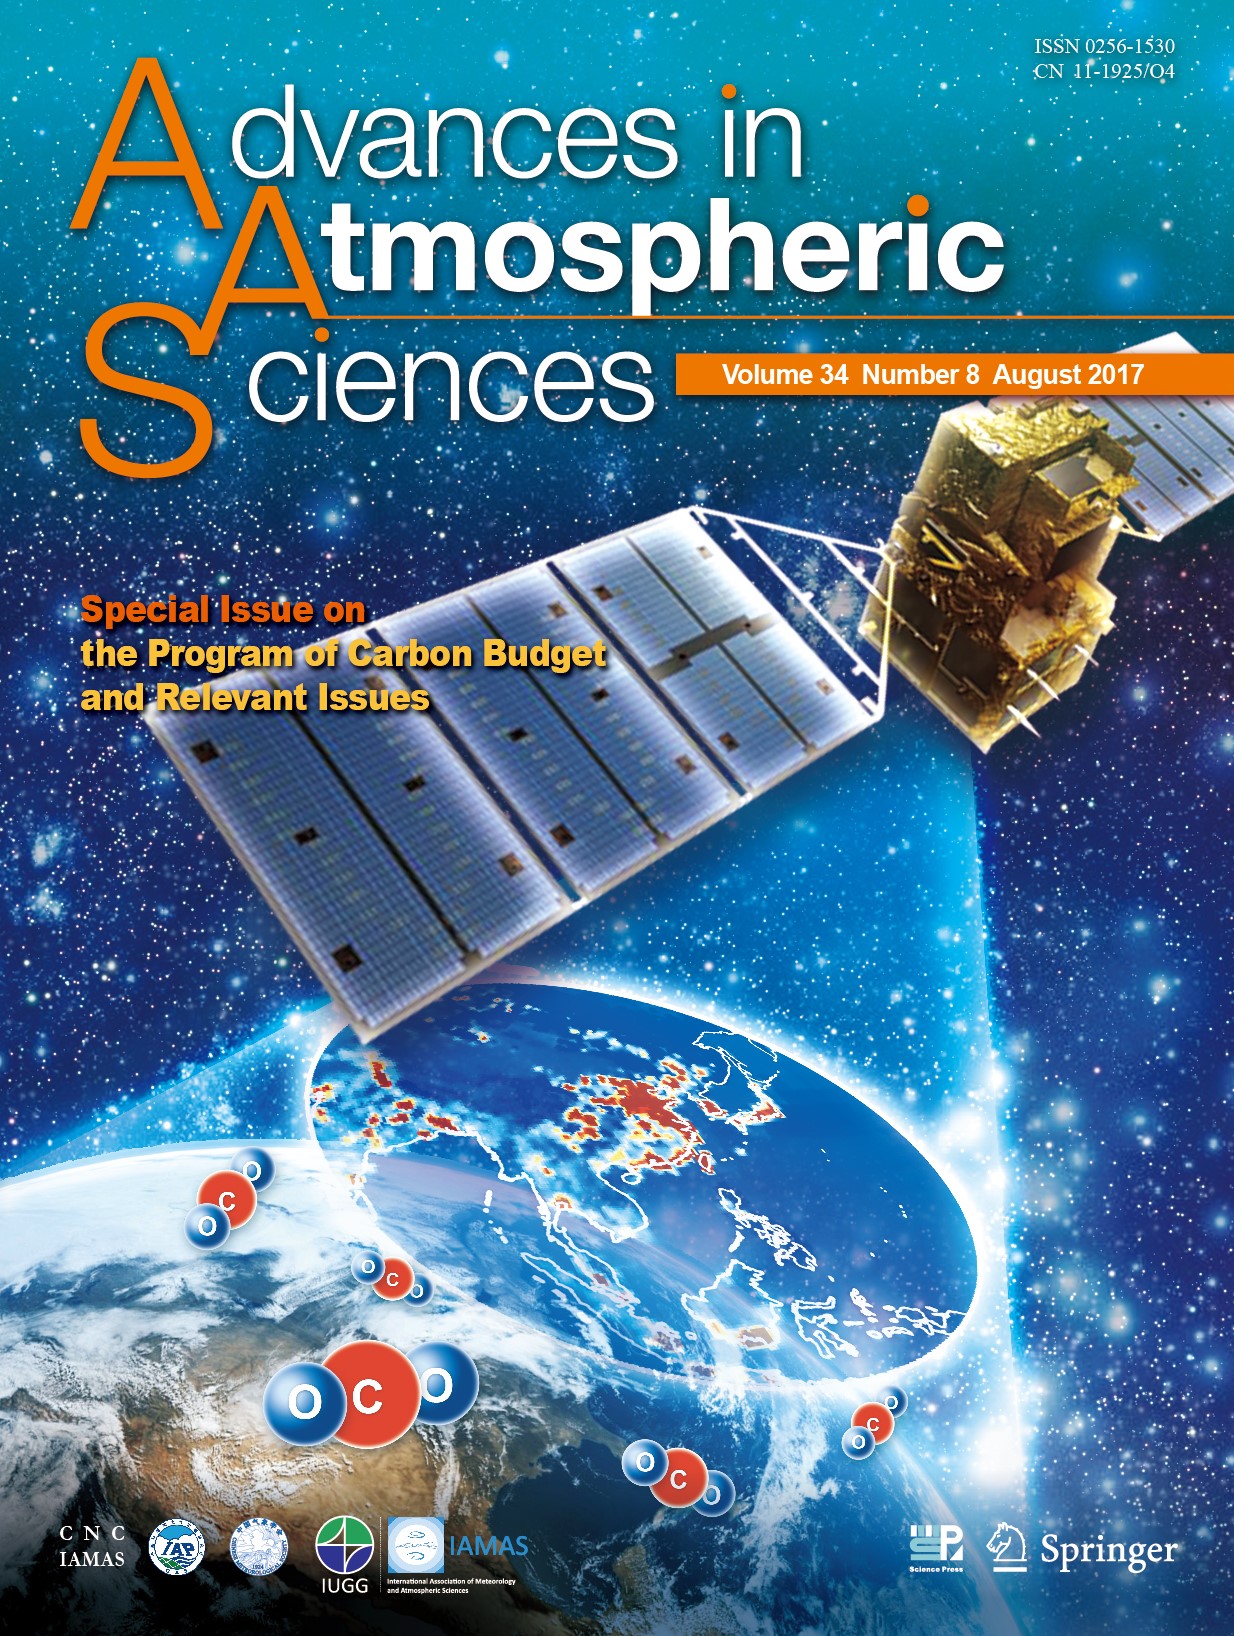 AAS Publishes a Special Issue on CAS Carbon Budget Program